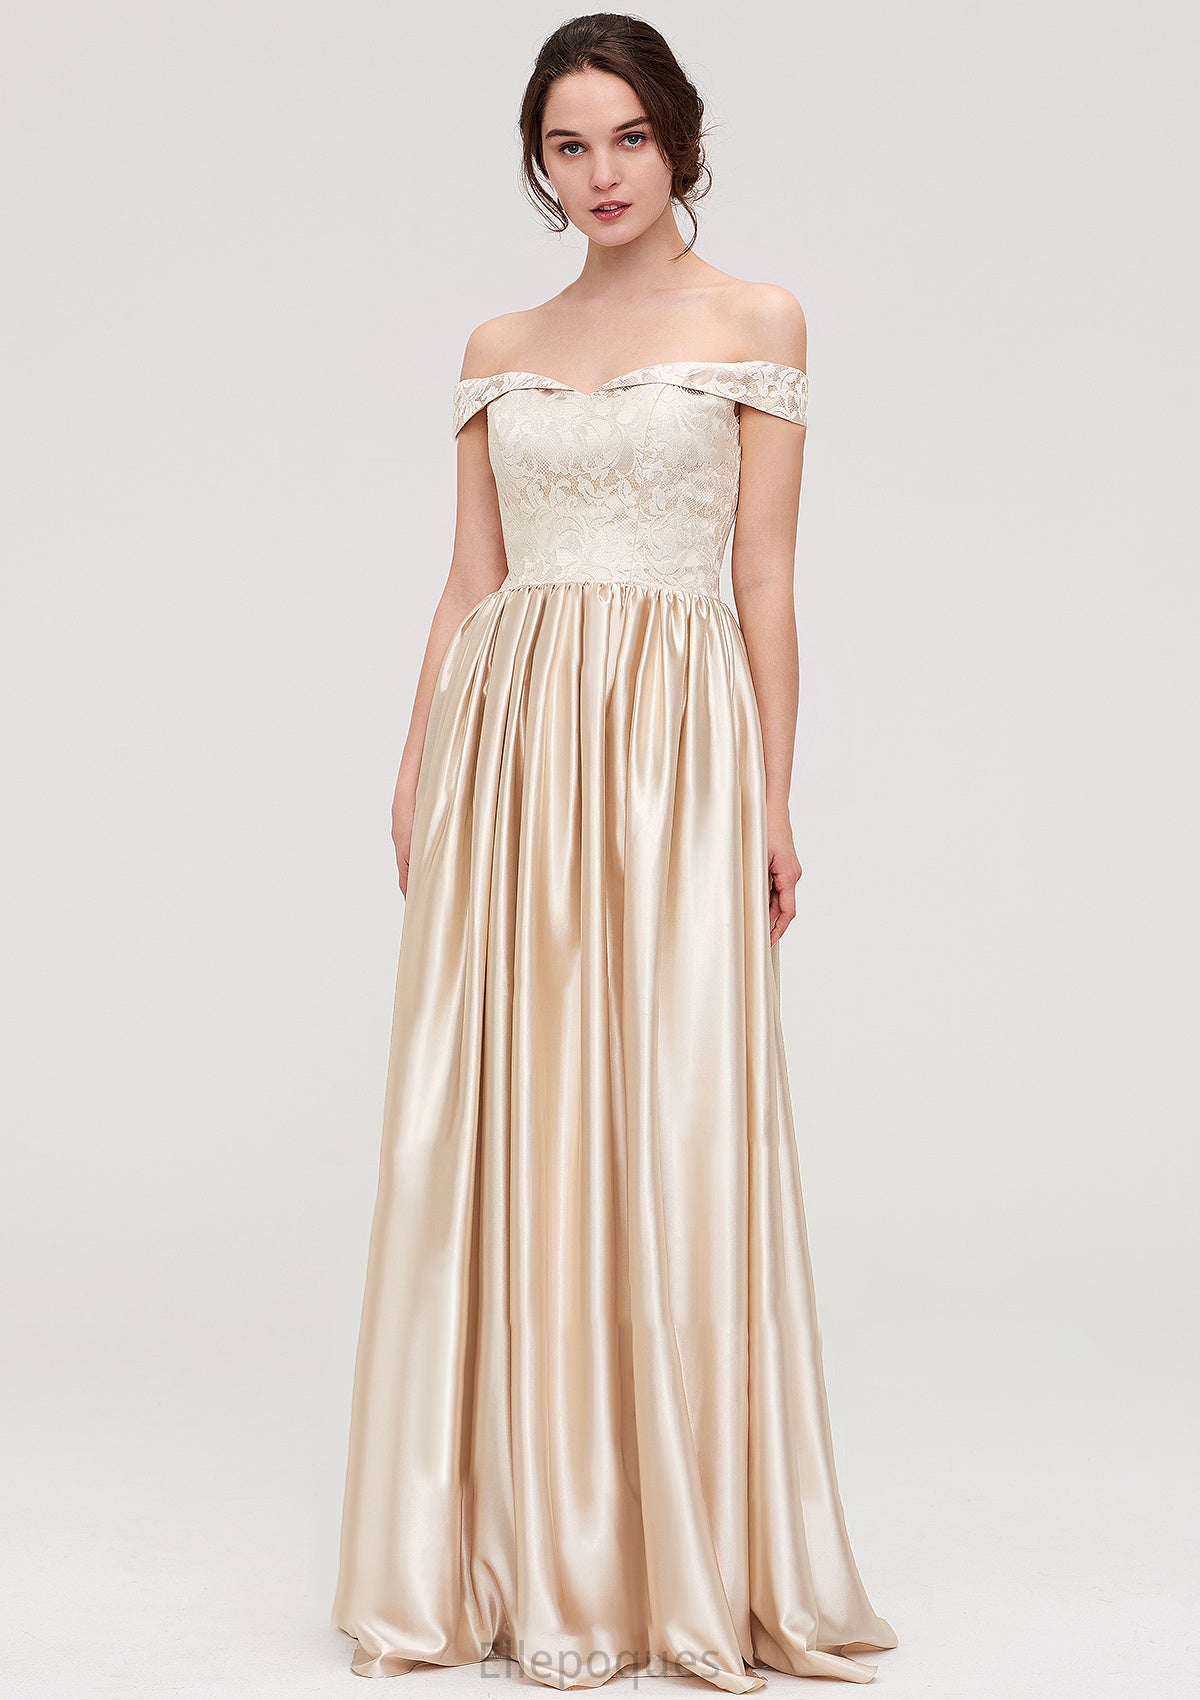 Off-the-Shoulder SleevelessA-line/Princess Charmeuse  Long/Floor-Length Bridesmaid Dresses With Appliqued Millicent HOP0025469